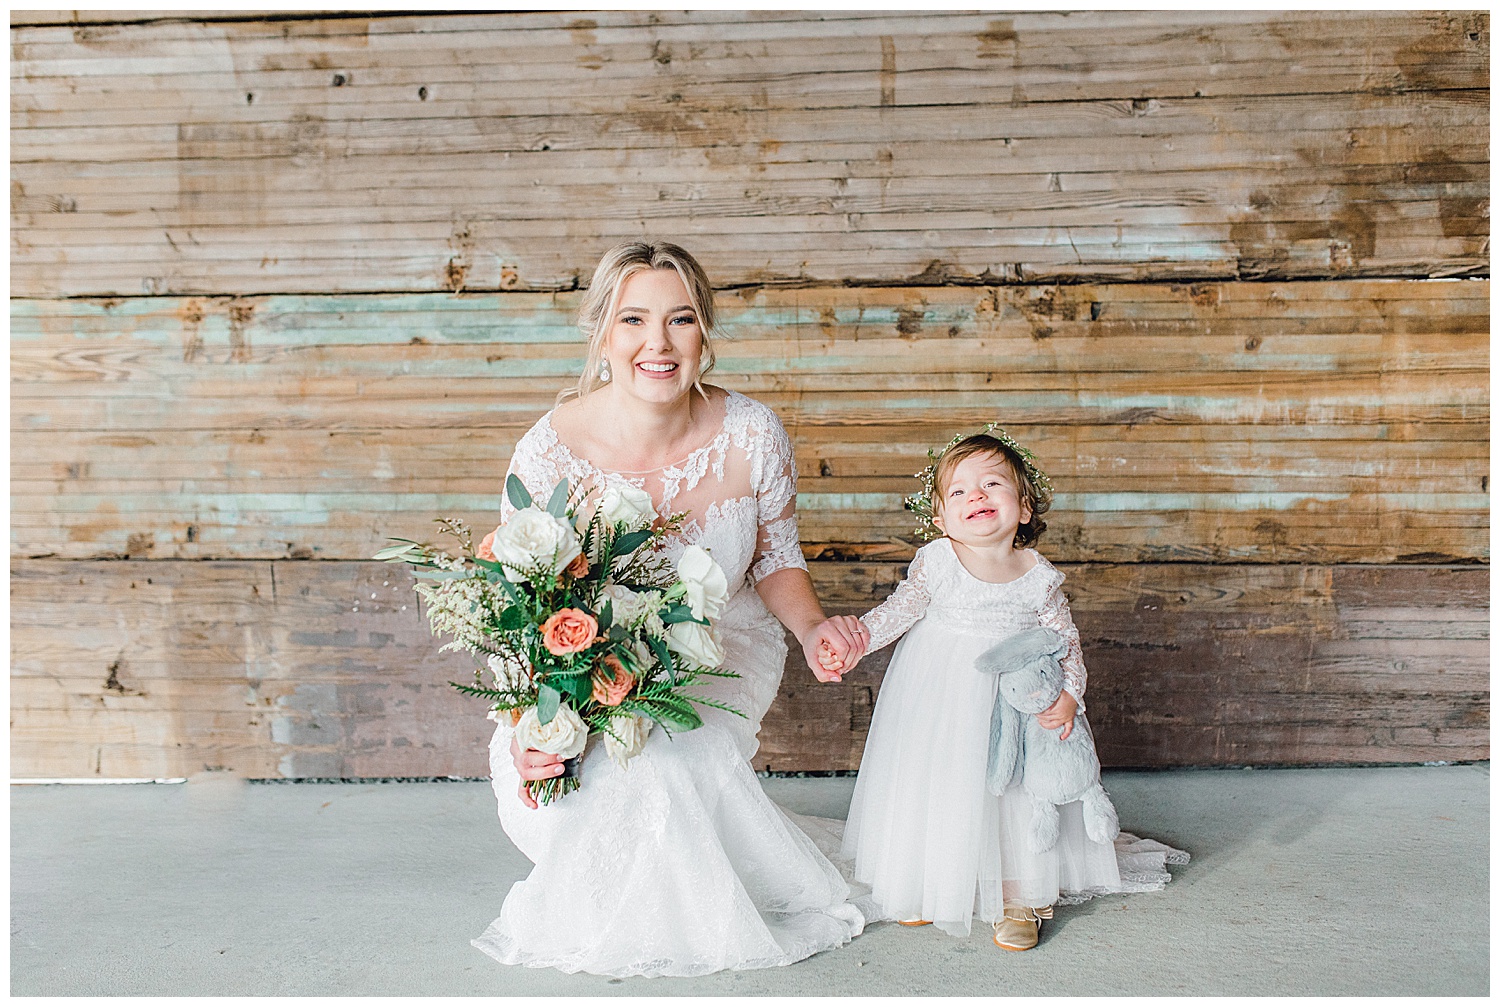 ERC-8116_A beautiful winter wedding in Snohomish, Washington at Thomas Family Farm was simply perfect.  This rustic and modern styled wedding was dripping with romance and photographed by Emma Rose Company, a pacific northwest wedding photographer..jpg